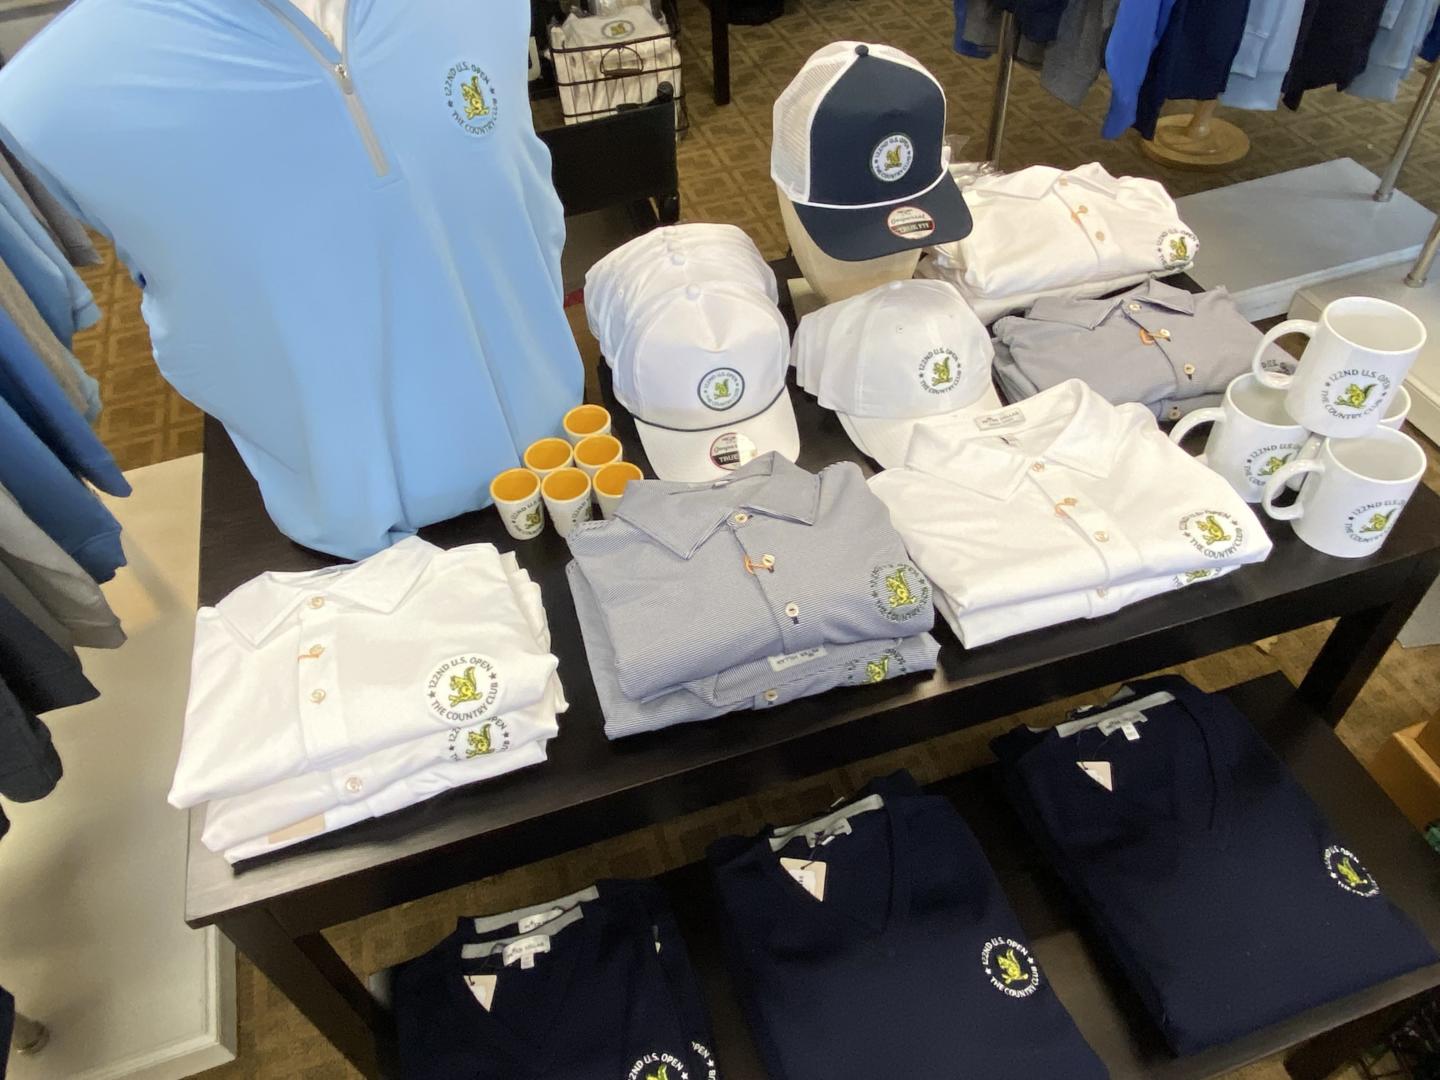 U.S. Open-branded apparel is available in the pro shop of Brookline Golf Course, with proceeds supporting local Brookline non-profits and community groups.